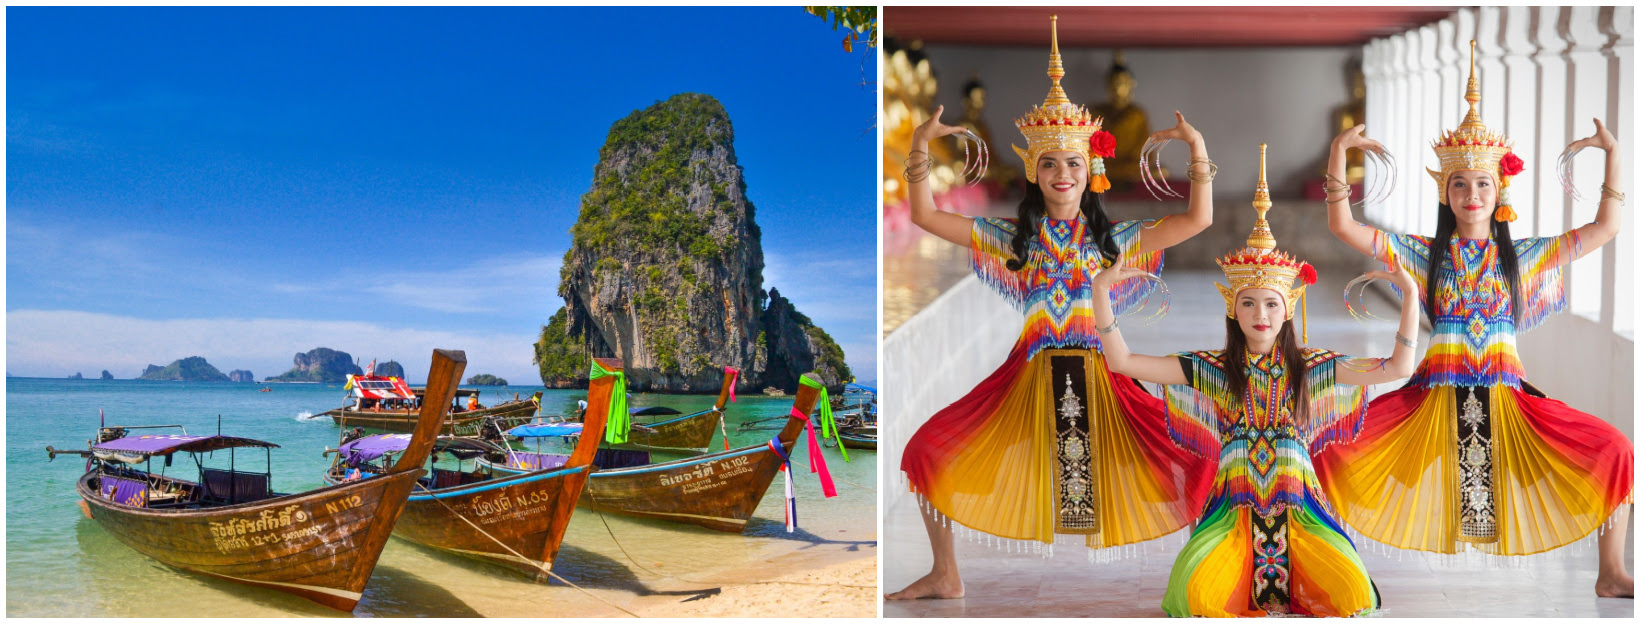 Petition From Thailand S Tourism Sector Seeks To Reopen Thailand Safely By 1 July Scandasia